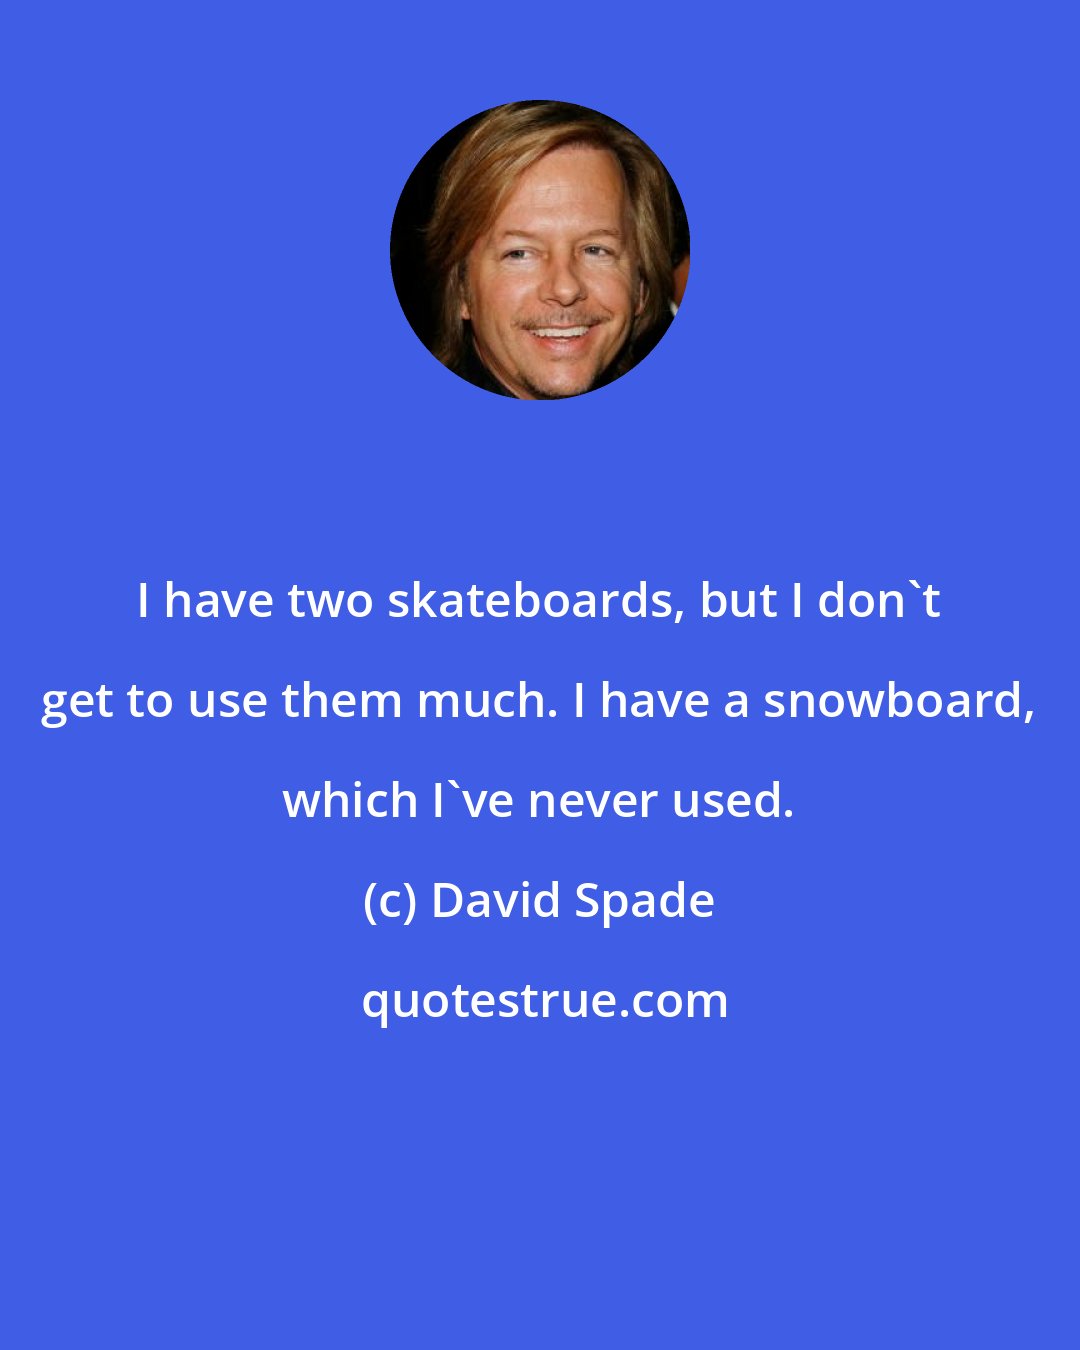 David Spade: I have two skateboards, but I don't get to use them much. I have a snowboard, which I've never used.